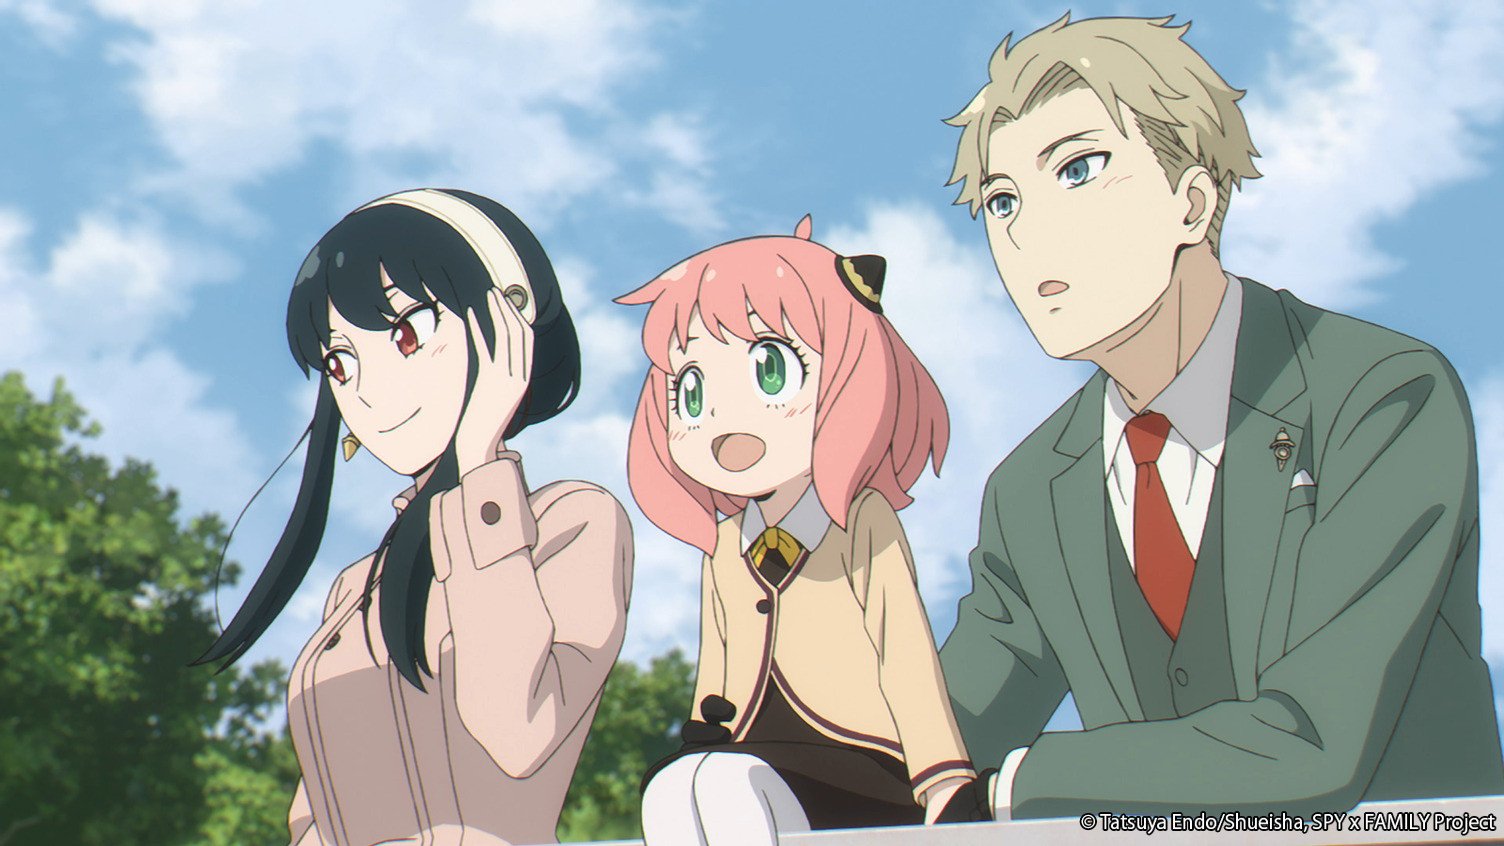 Yor, Anya, and Loid Forger, all of whom will return in 'Spy x Family' Season 1 Part 2. They're standing next to one another, and they all look happy. The sky behind them is blue with clouds.